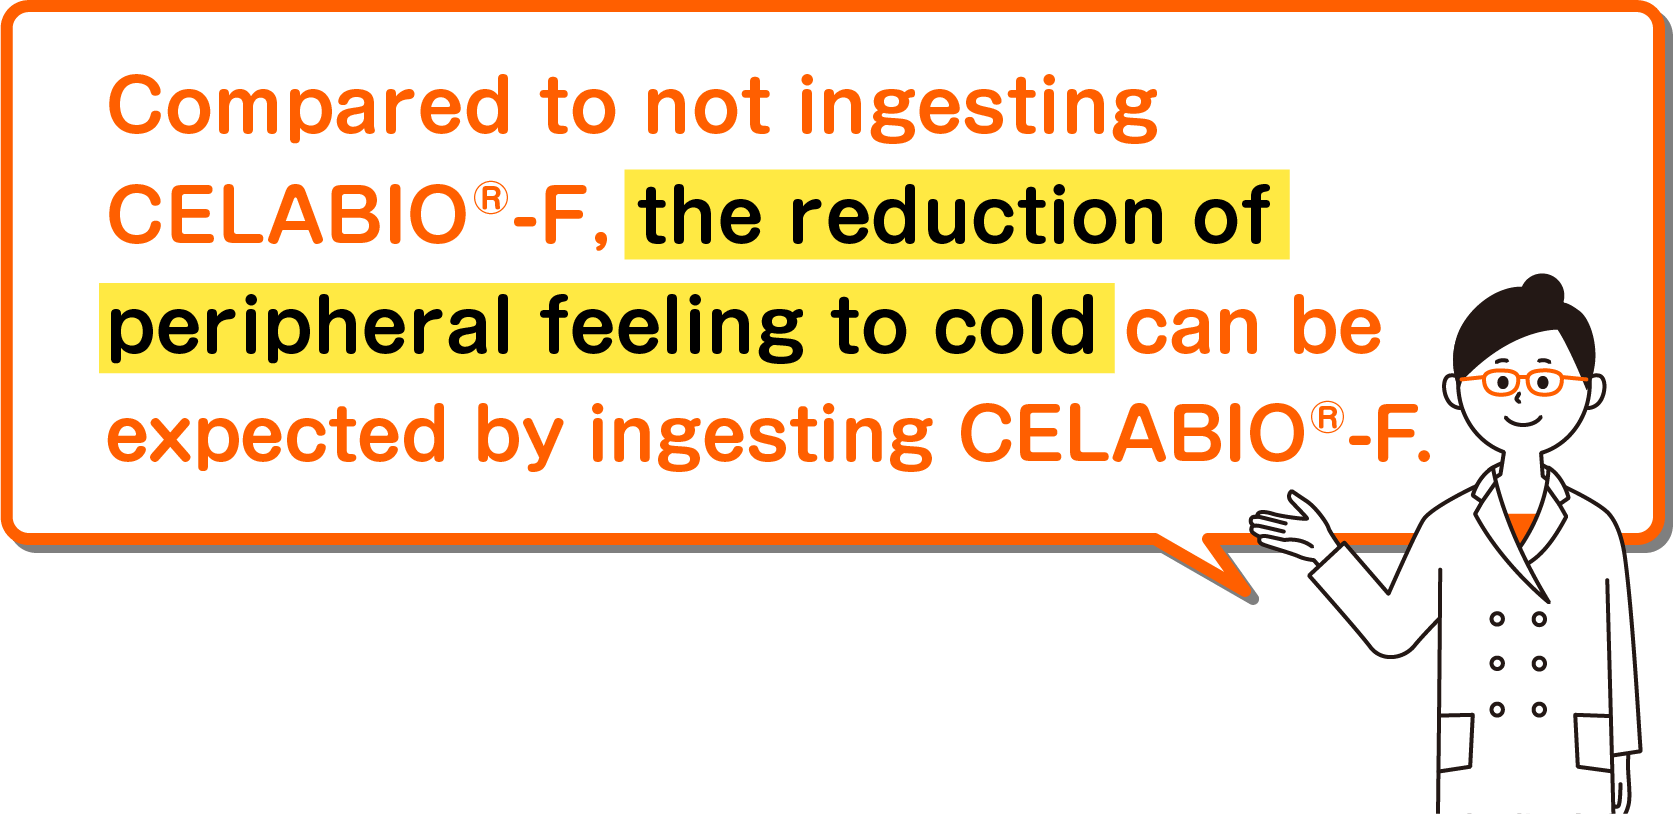 Compared to not ingesting CELABIO®-F, the reduction of peripheral feeling to cold can be expected by ingesting